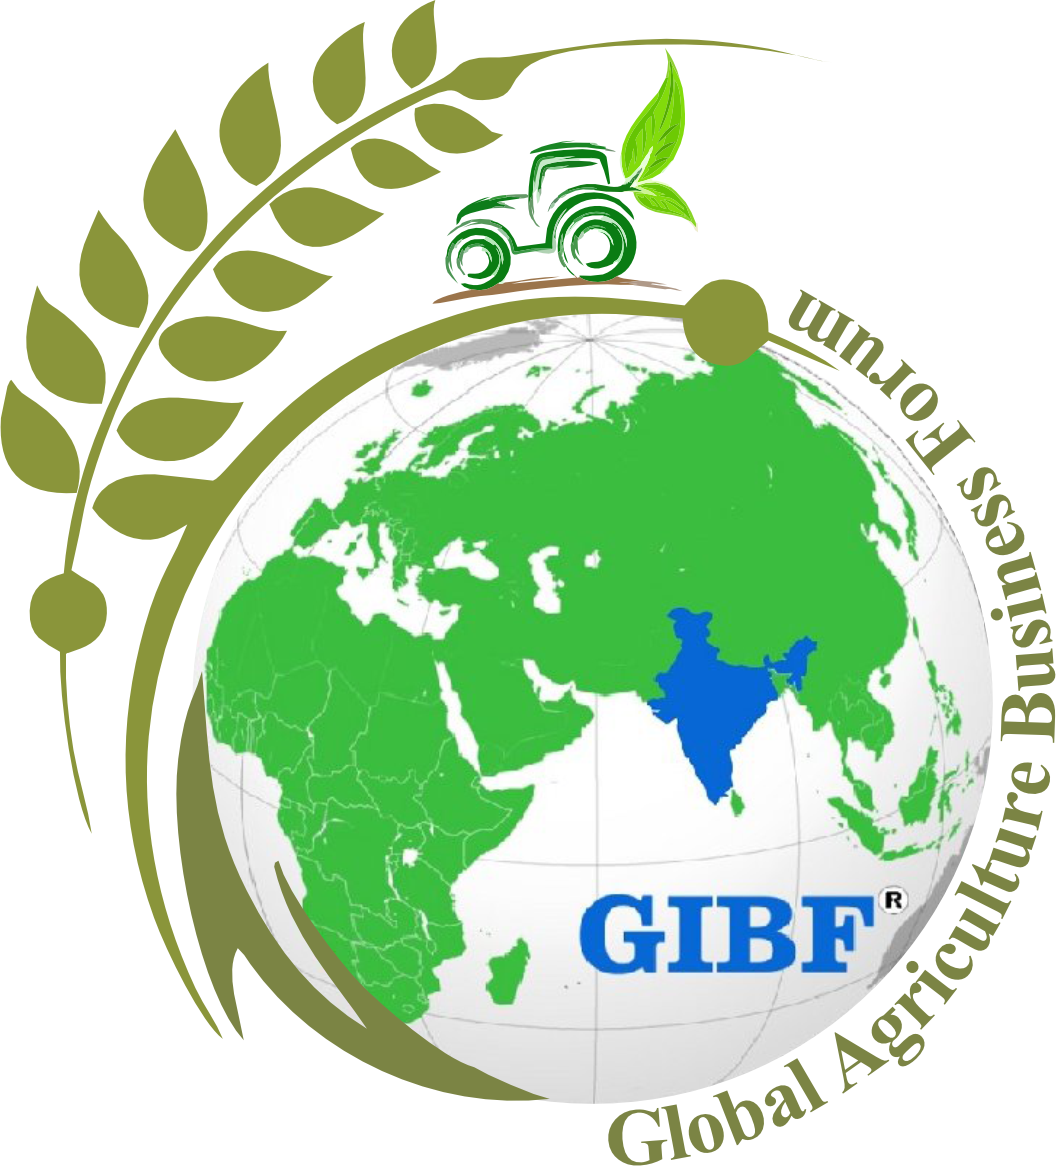 Global Agriculture Business Group logo